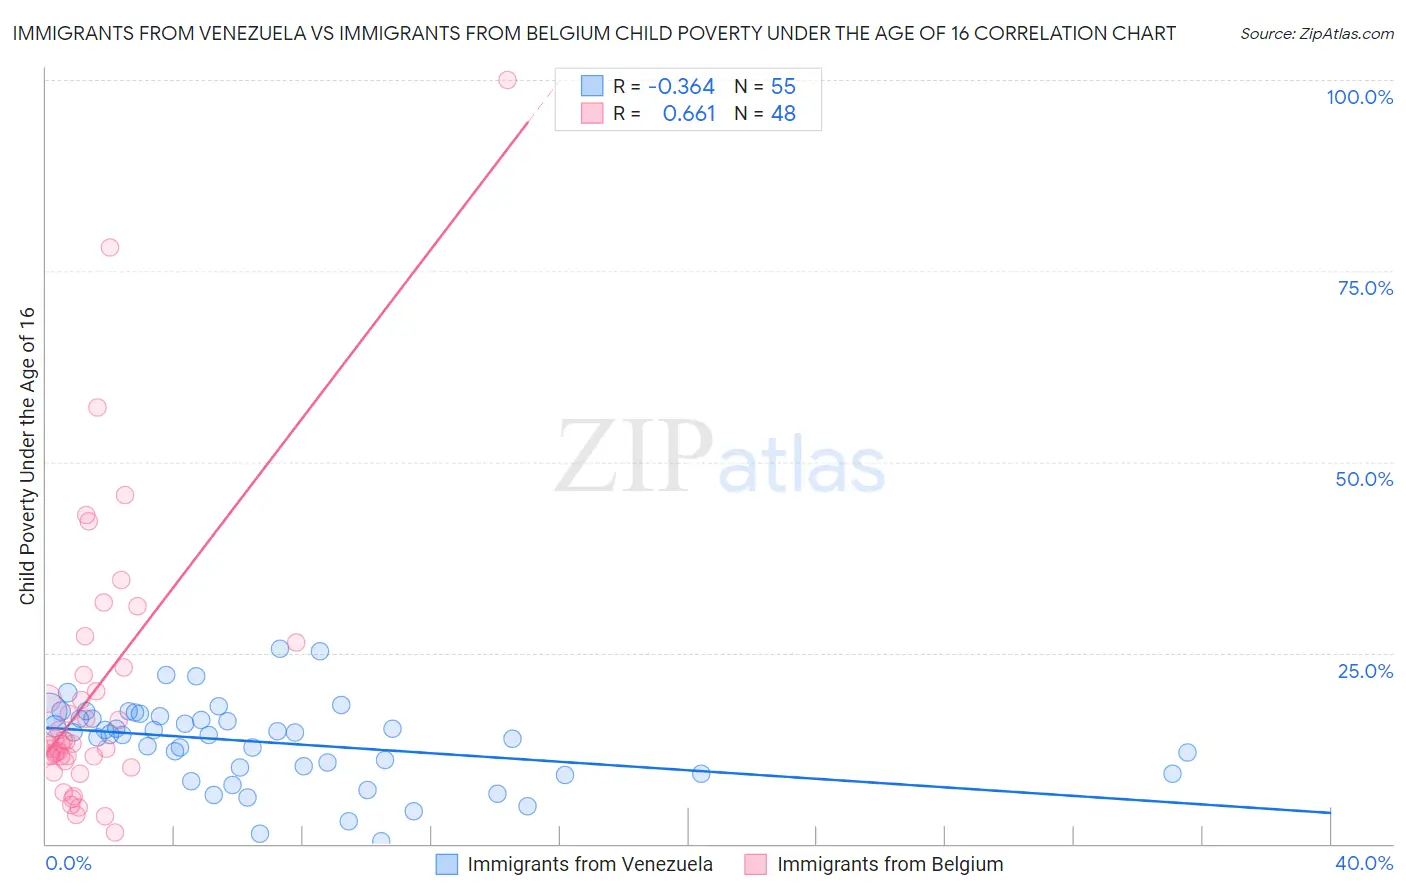 Immigrants from Venezuela vs Immigrants from Belgium Child Poverty Under the Age of 16